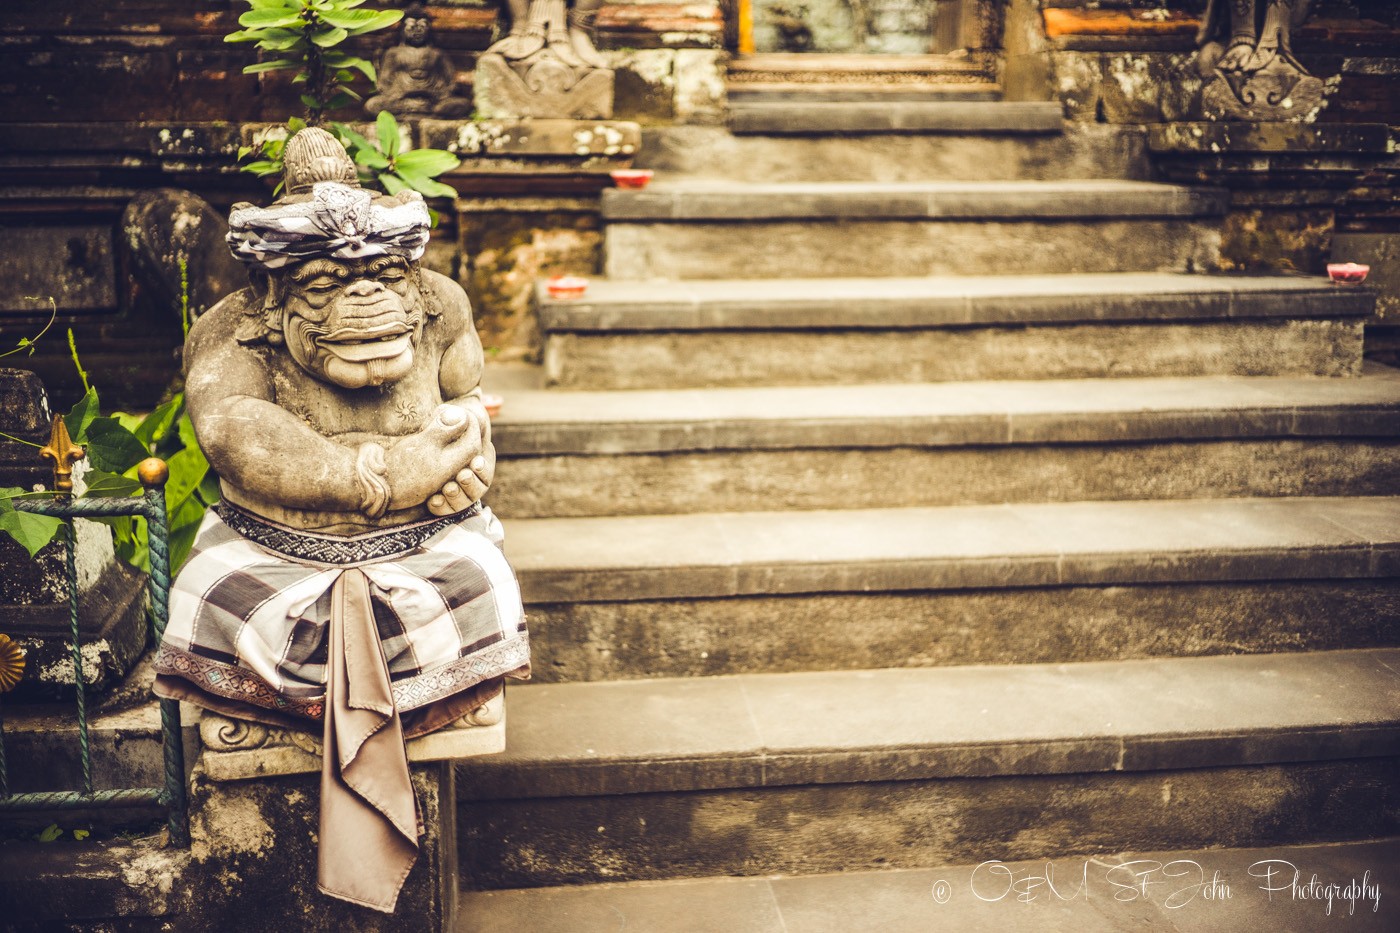 Cultural Close-Up: Why Statues in Bali are Drapped in Checkered Sarongs